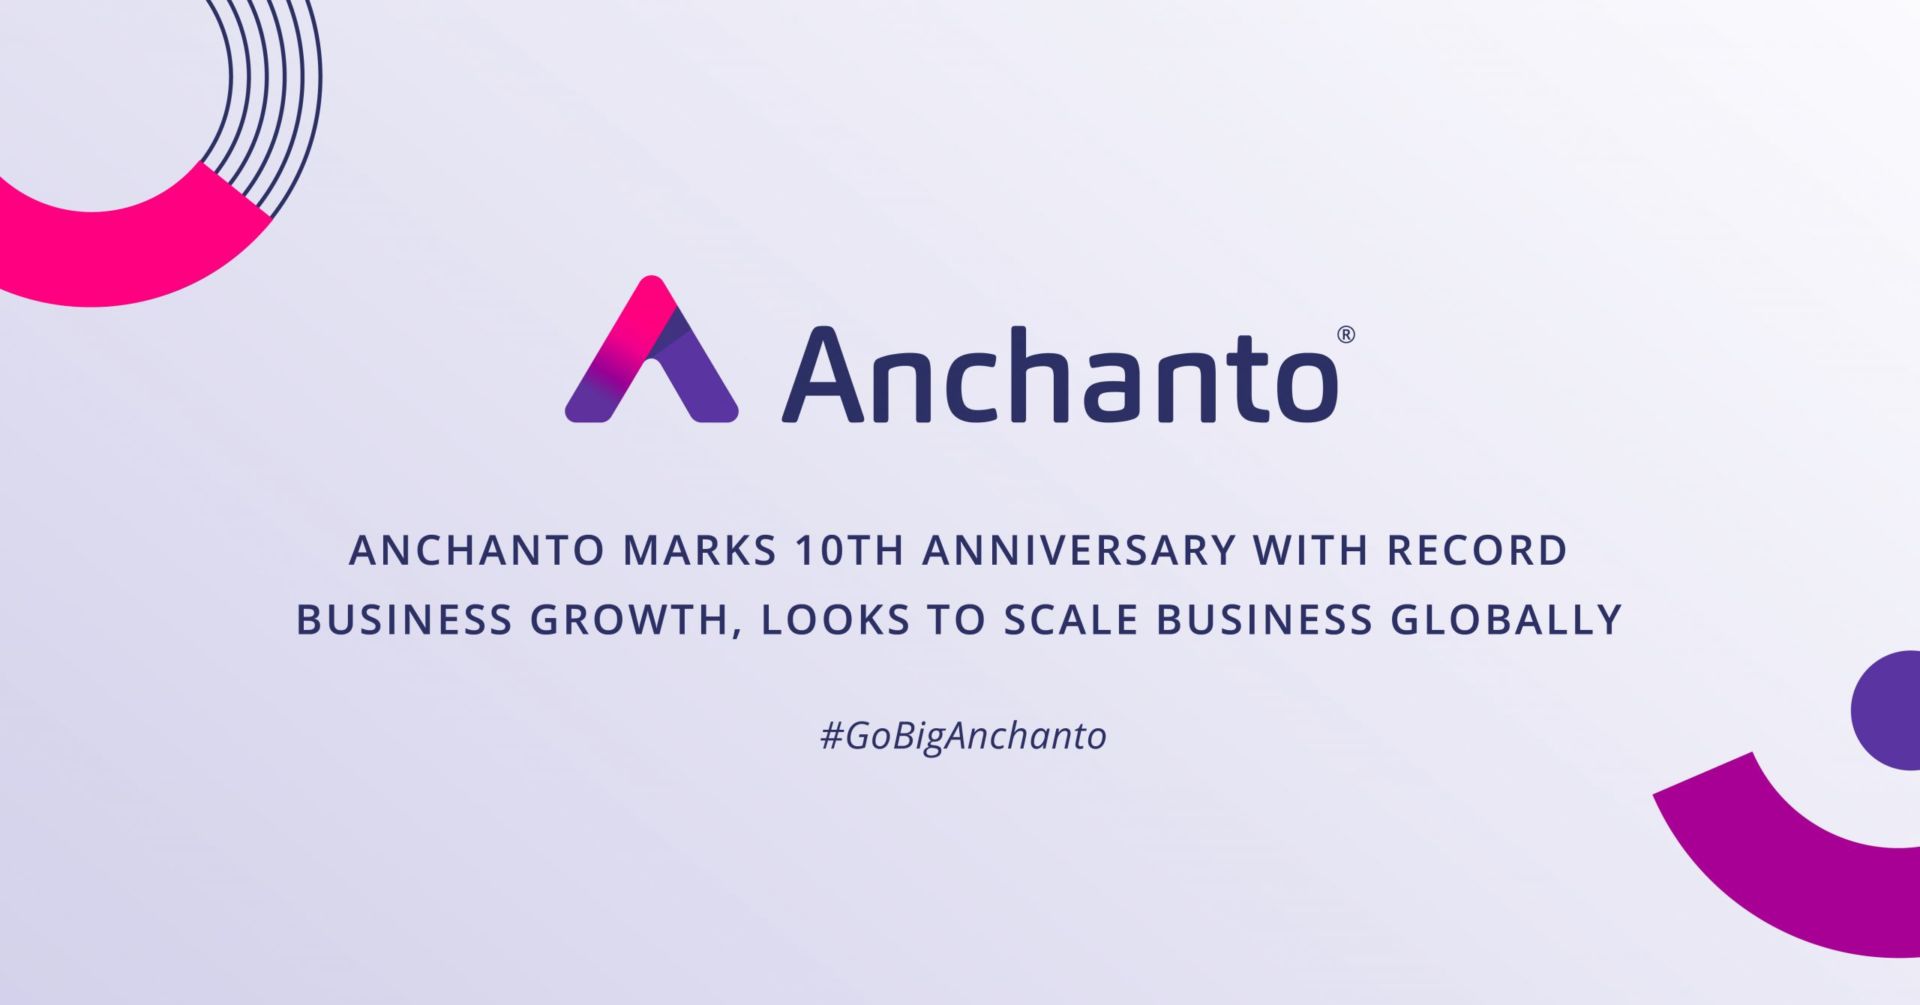 Anchanto Marks 10th Anniversary with Record Business Growth and Looks to Scale Business Globally